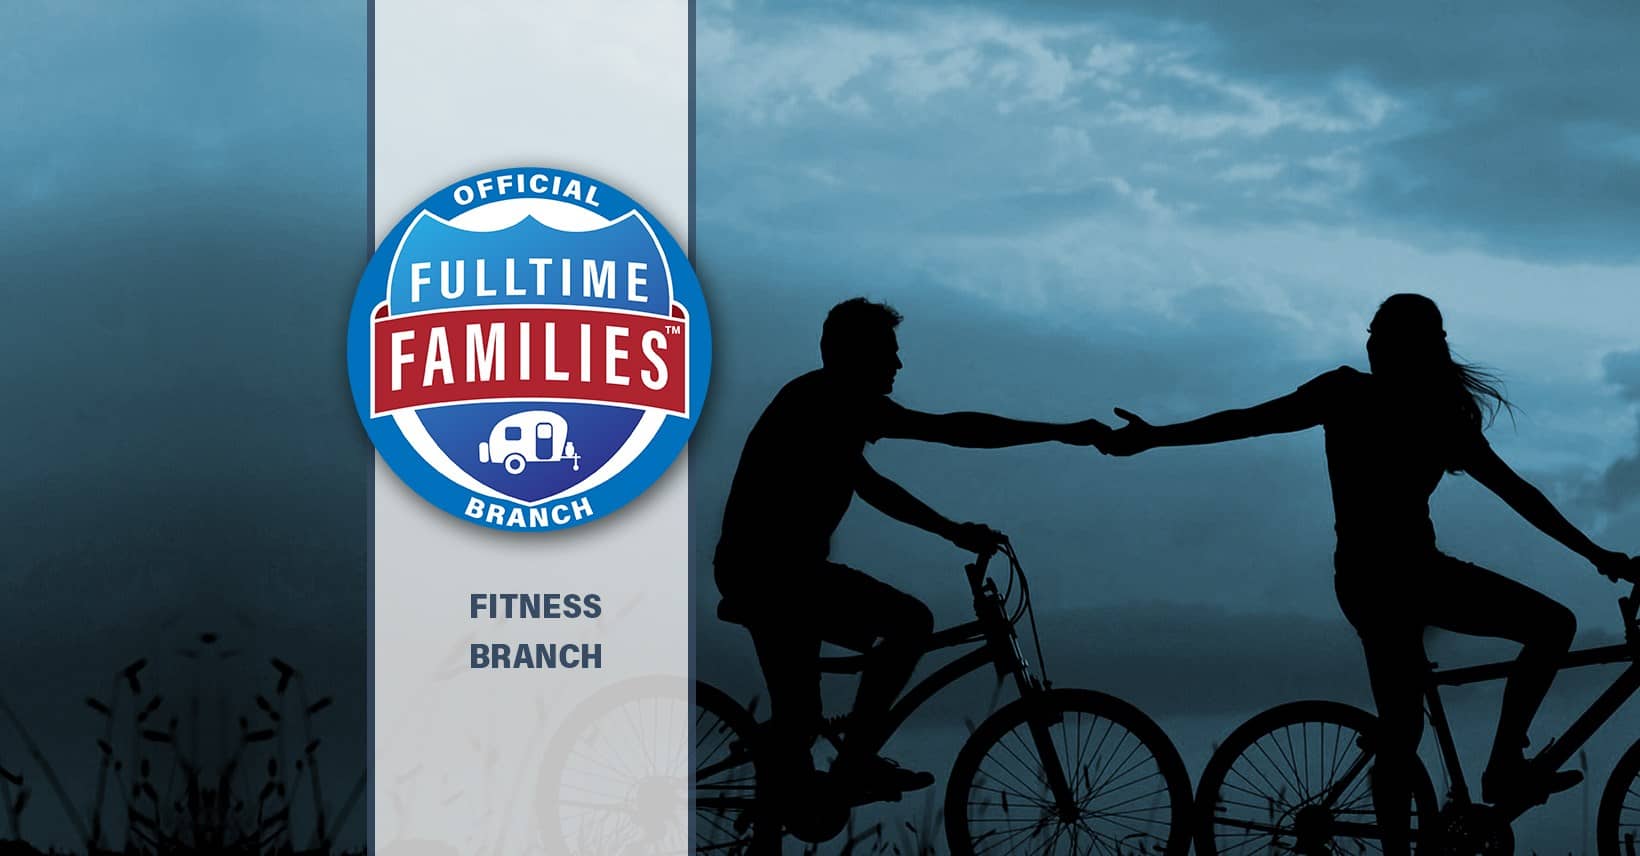 Fulltime Families Branches - Fulltime Families